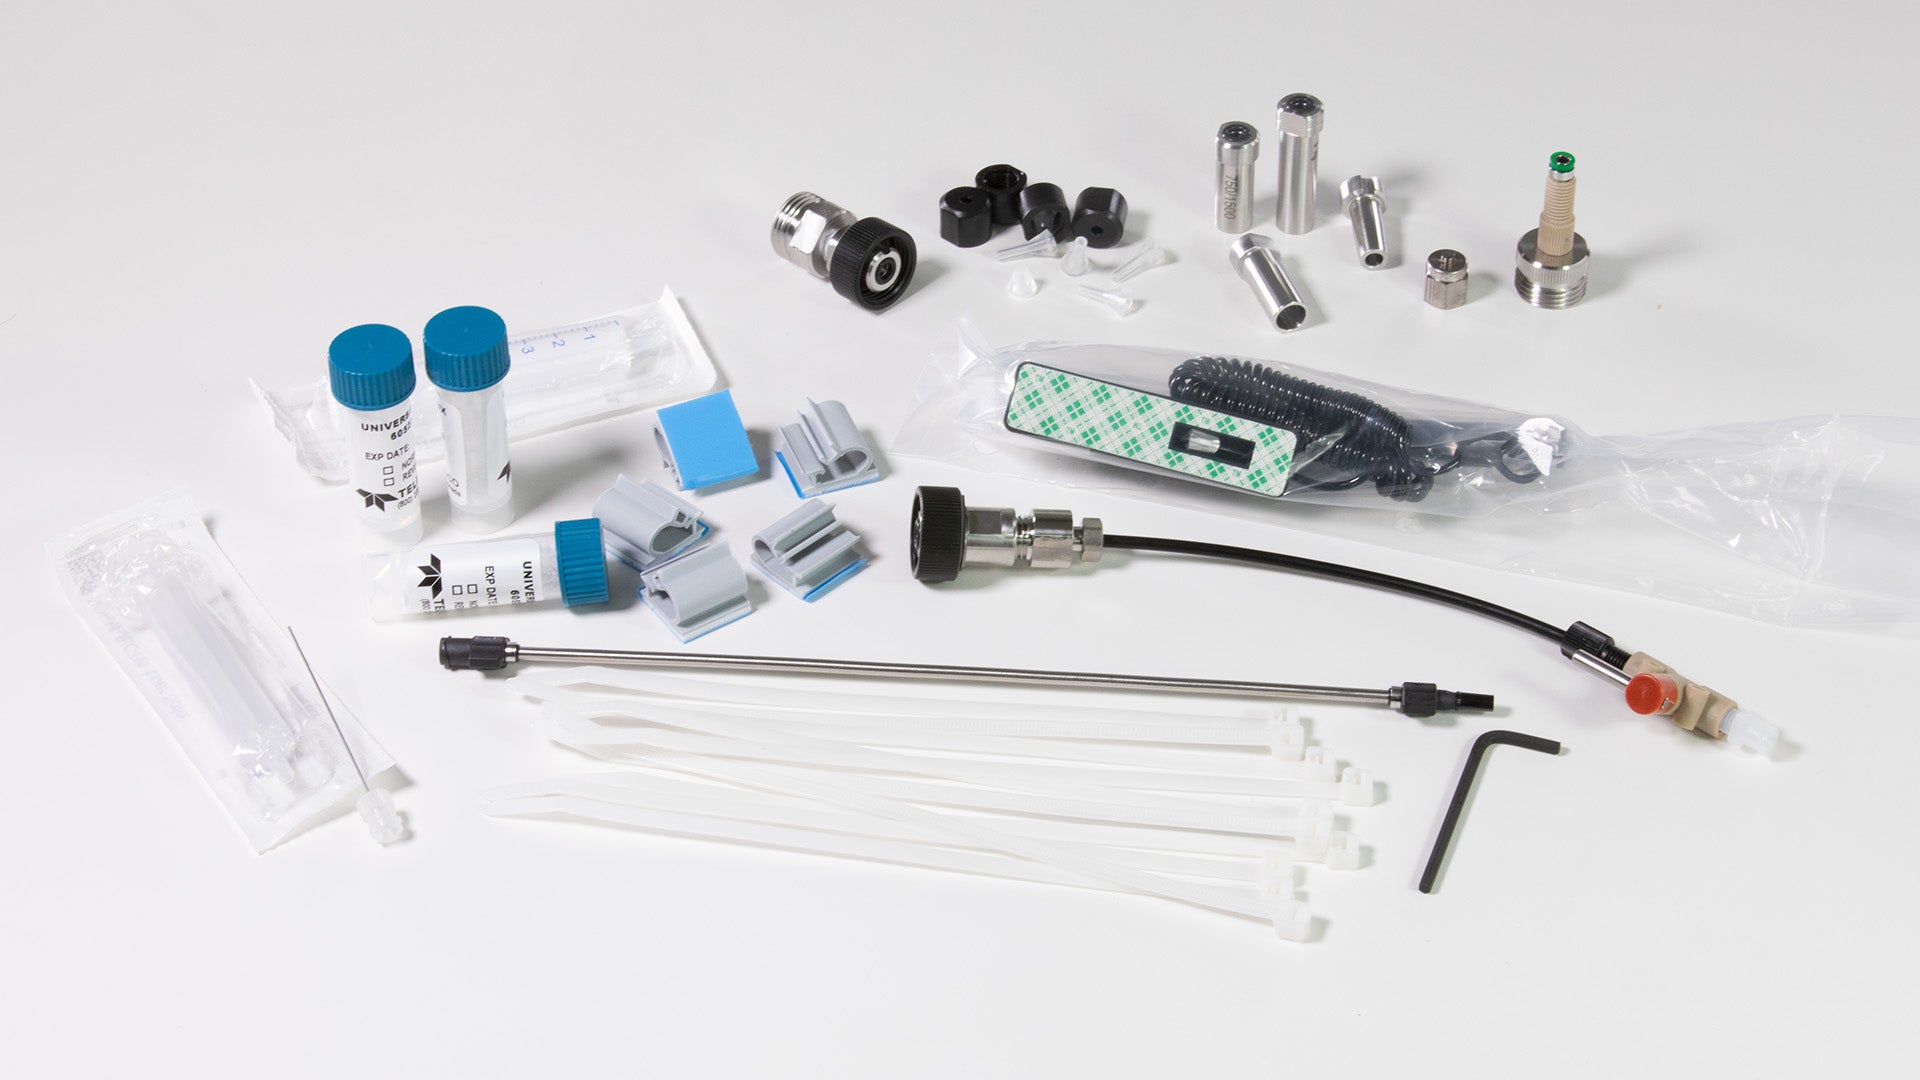 Prime Tube Assembly, Stylus, Female luers, Cartridge adapter, plug, Liquid injection kit, ferrules, clips, and o-rings